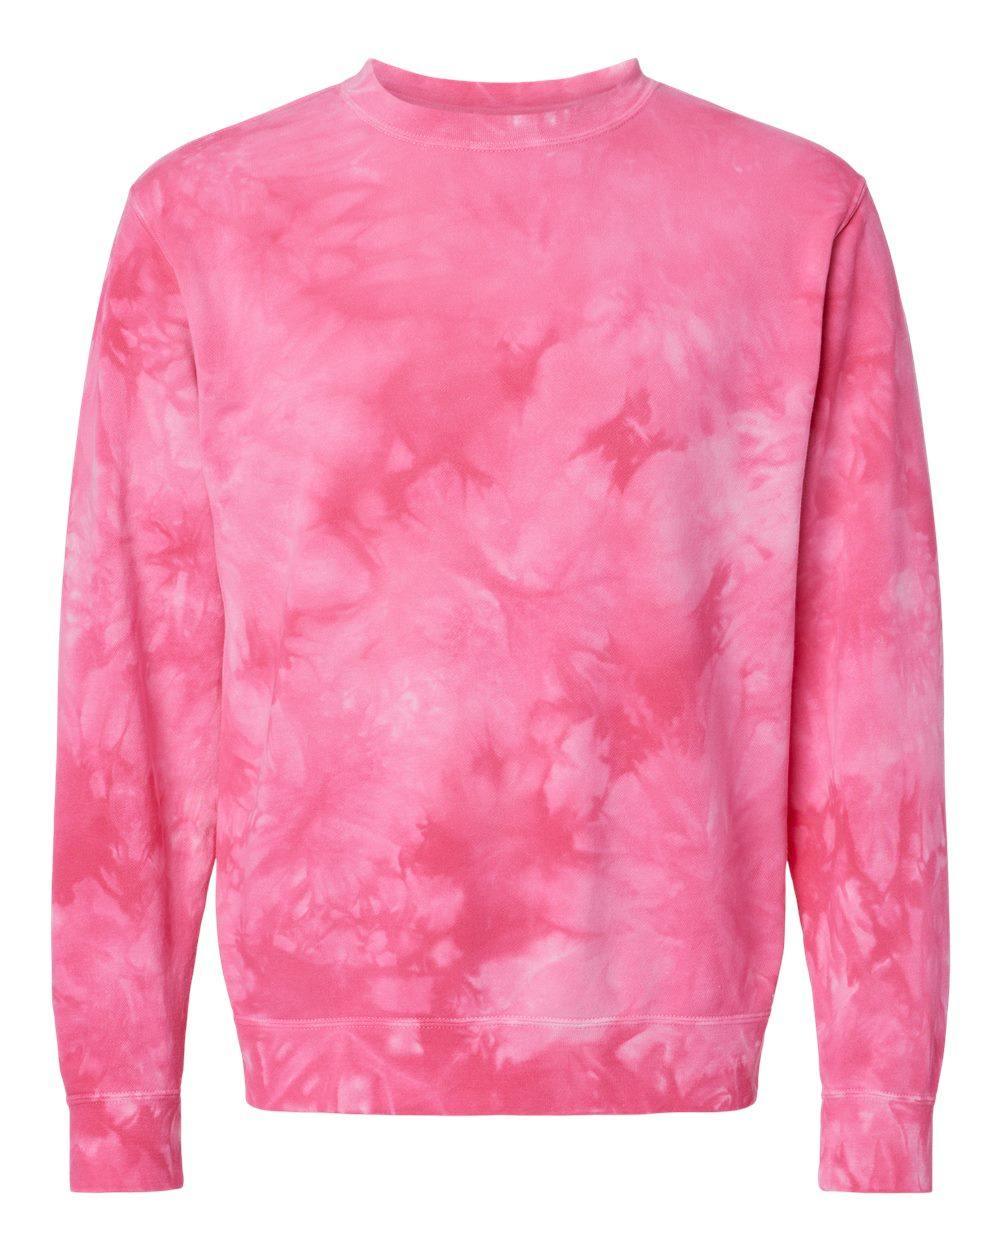 Blank Tie Dye Pigment Dyed Sweaters - Constantly Create Shop